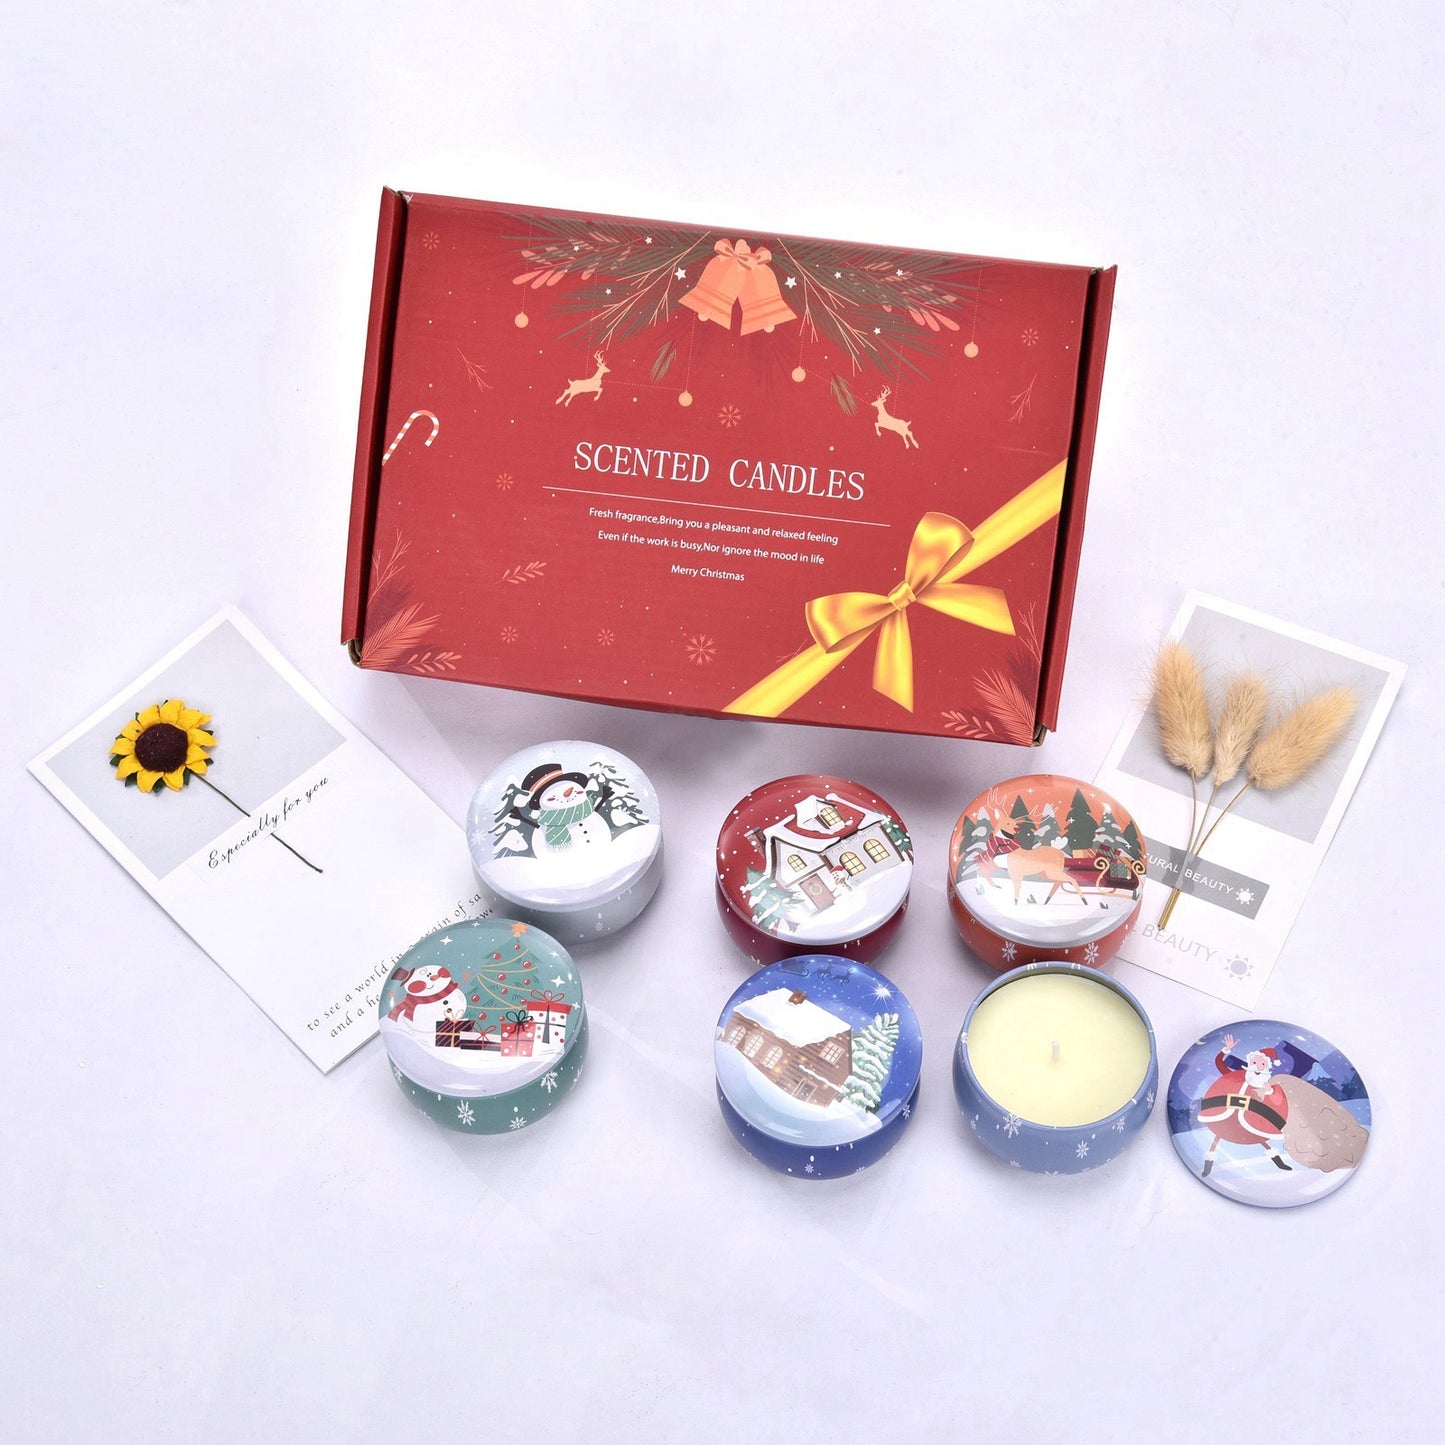 Christmas candle scented candle gift set 6 pieces